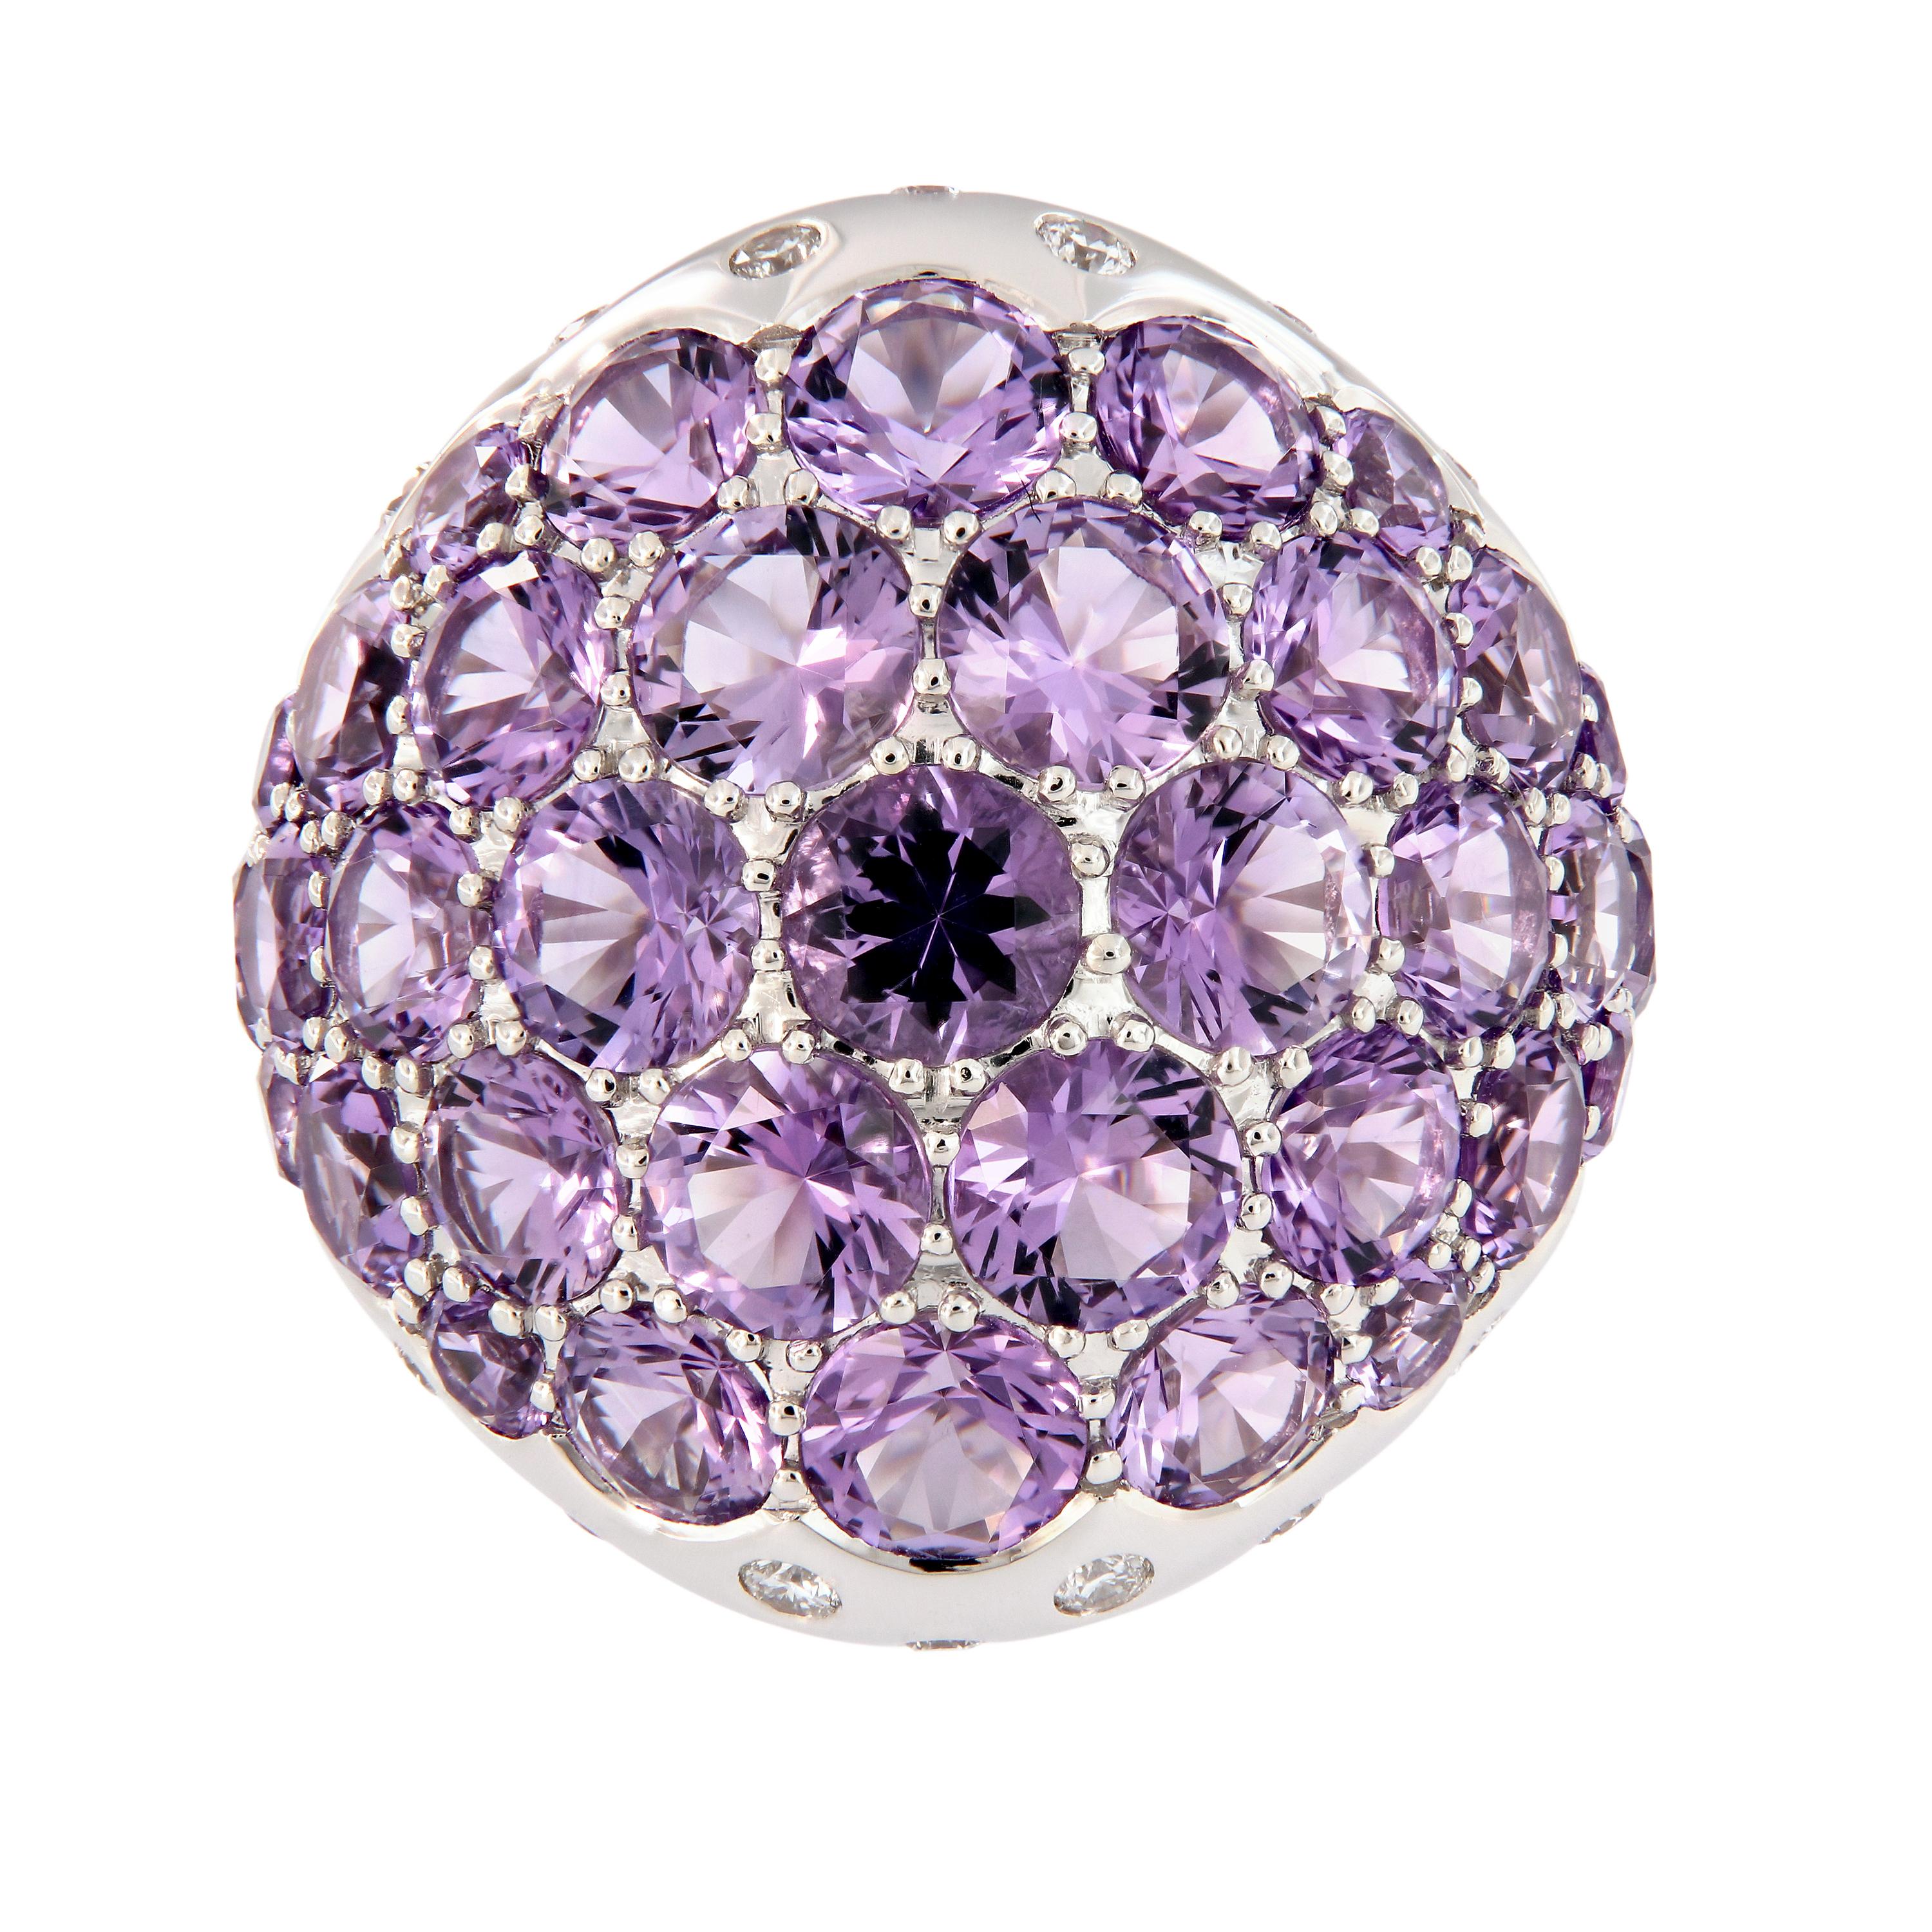 Make a stunning color statement with this 18k white gold dome ring. Ring features round light purple amethyst gemstones in a variety of sizes, accented with diamonds. Ring size is 6.25. Weighs 18.1 grams.

Amethyst 8.90 cttw
Diamond 0.44 cttw